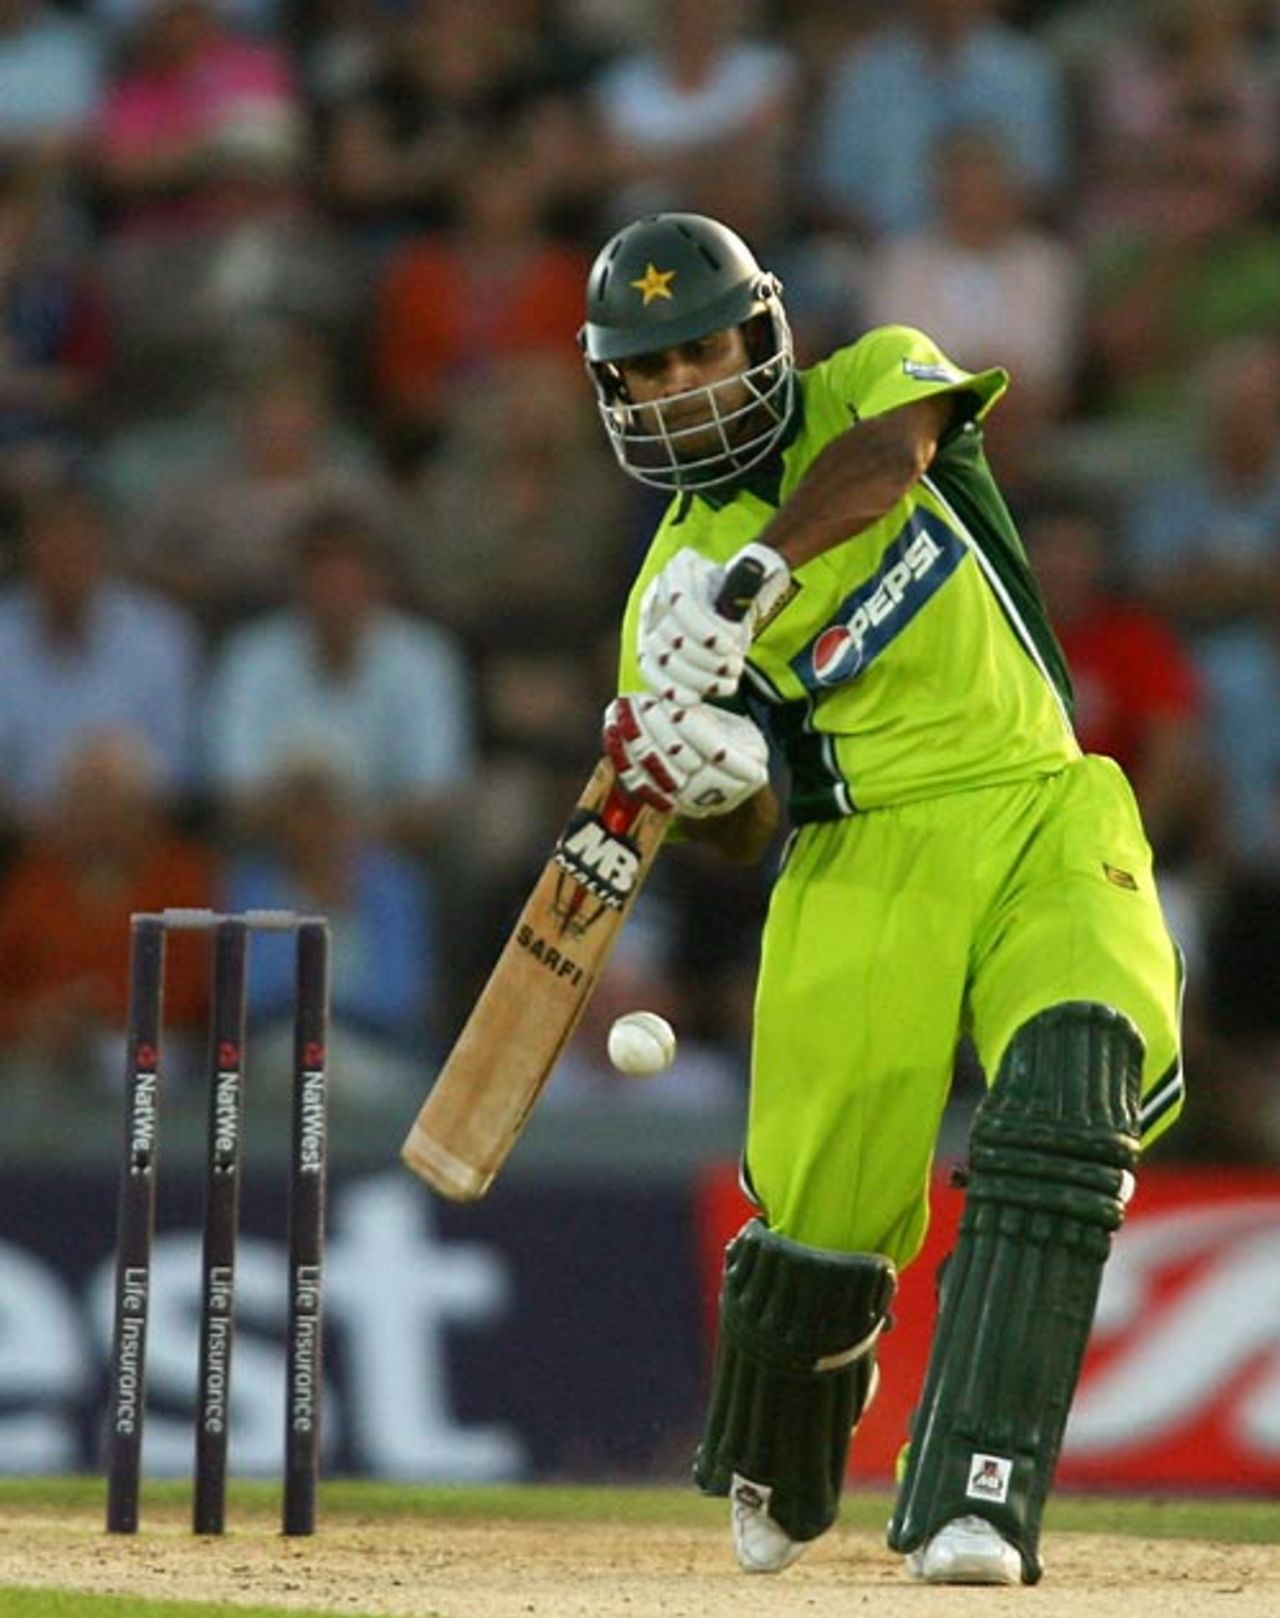 Mohammad Hafeez clobbers one over the top, England v Pakistan, 3rd ODI, The Rose Bowl, September 5, 2006